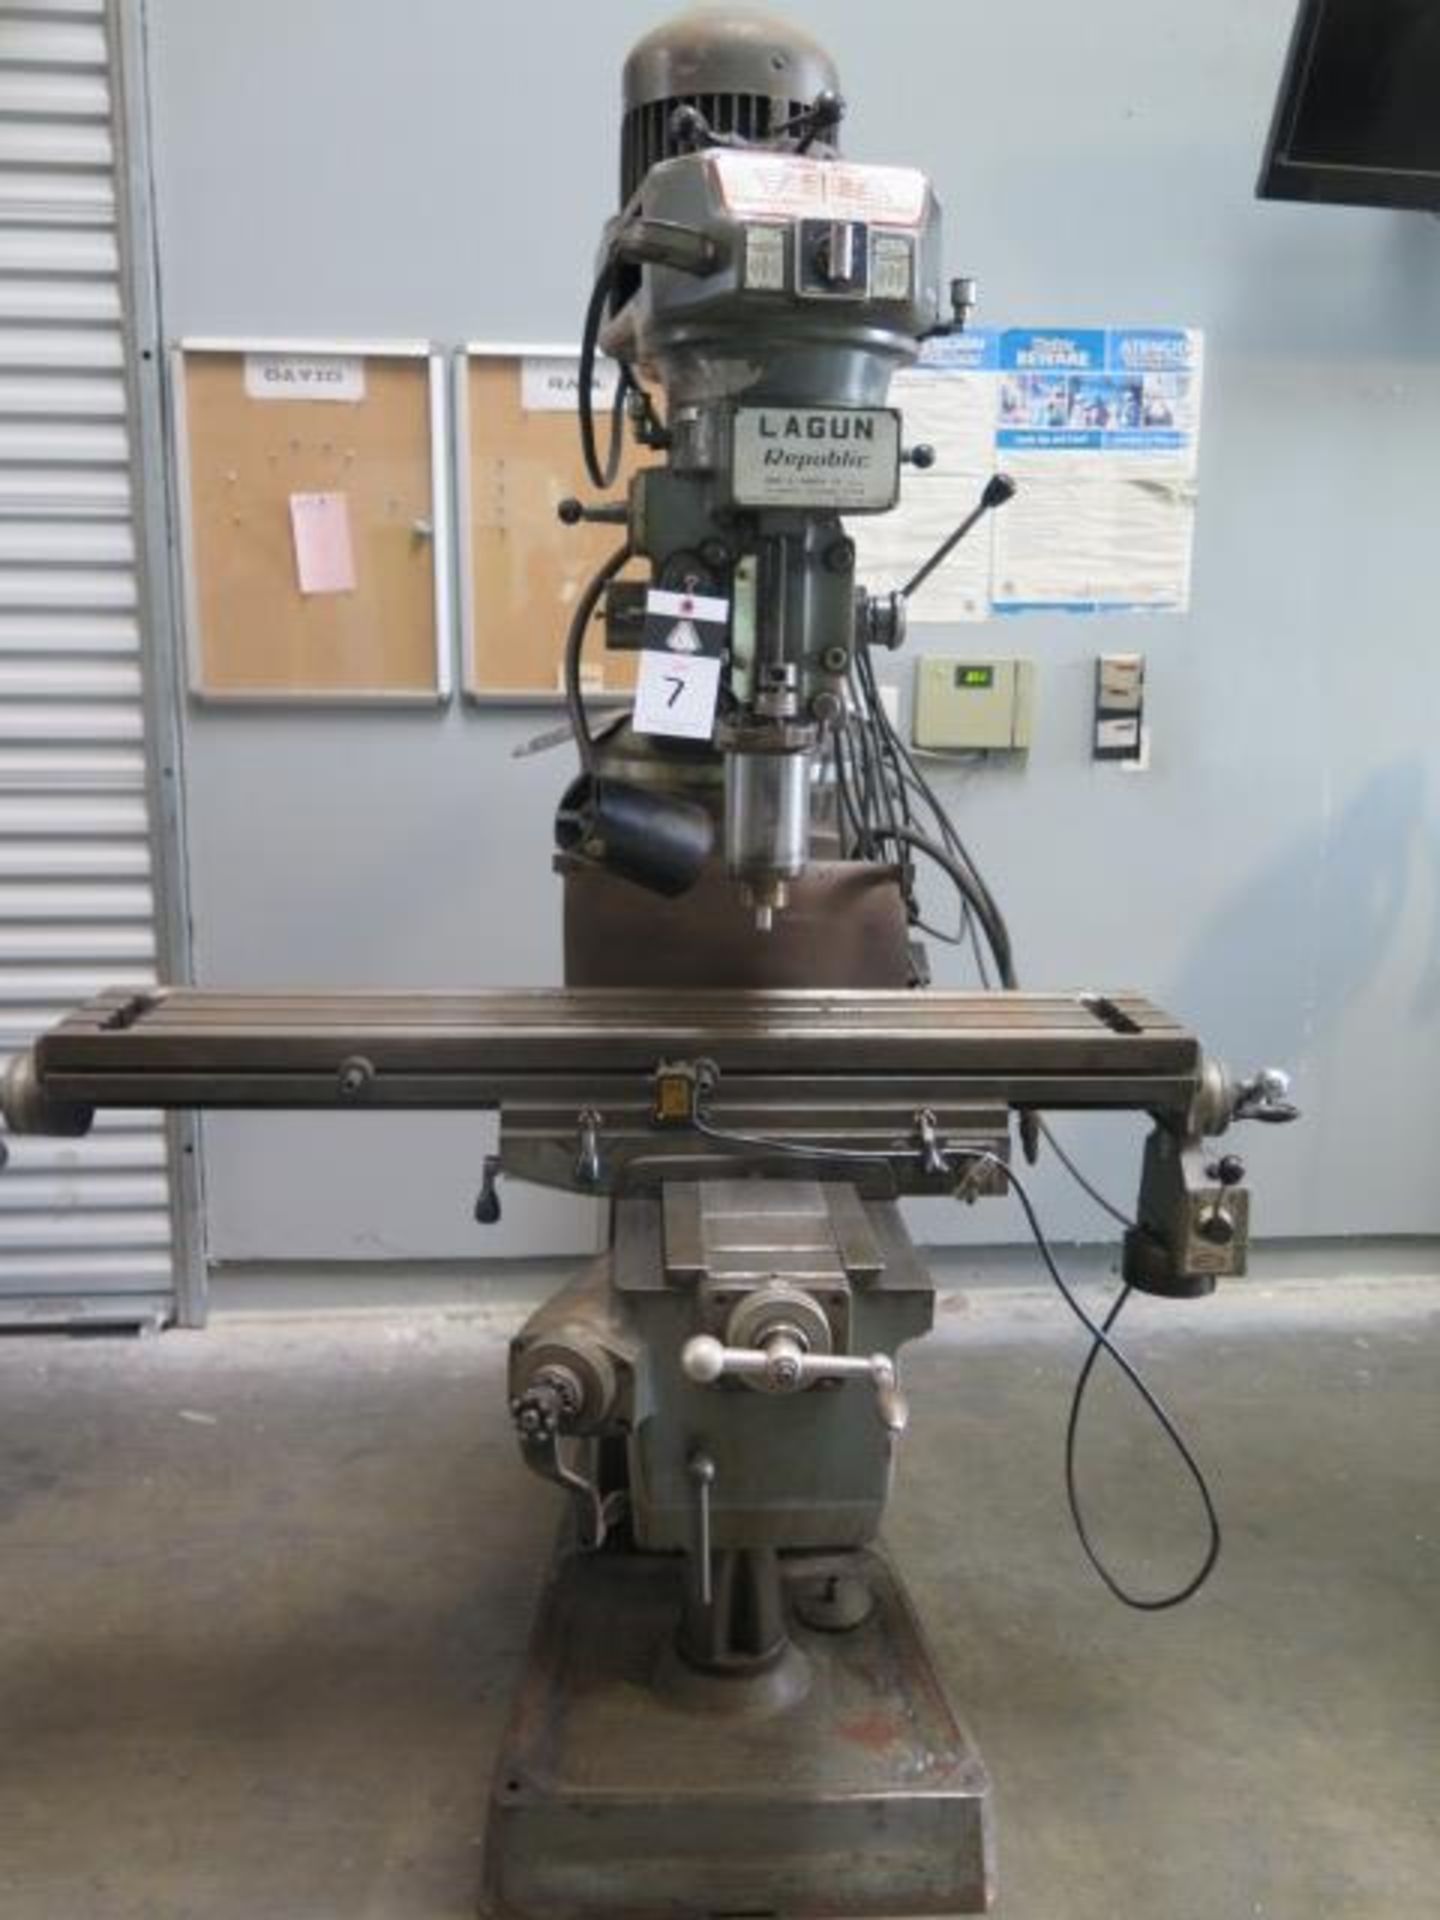 Lagun FT-2 Vertical Mill w/ 55-2940 RPM, 8-Speeds, Chrome Ways, Power Feed, 9” x 48” SOLD AS IS